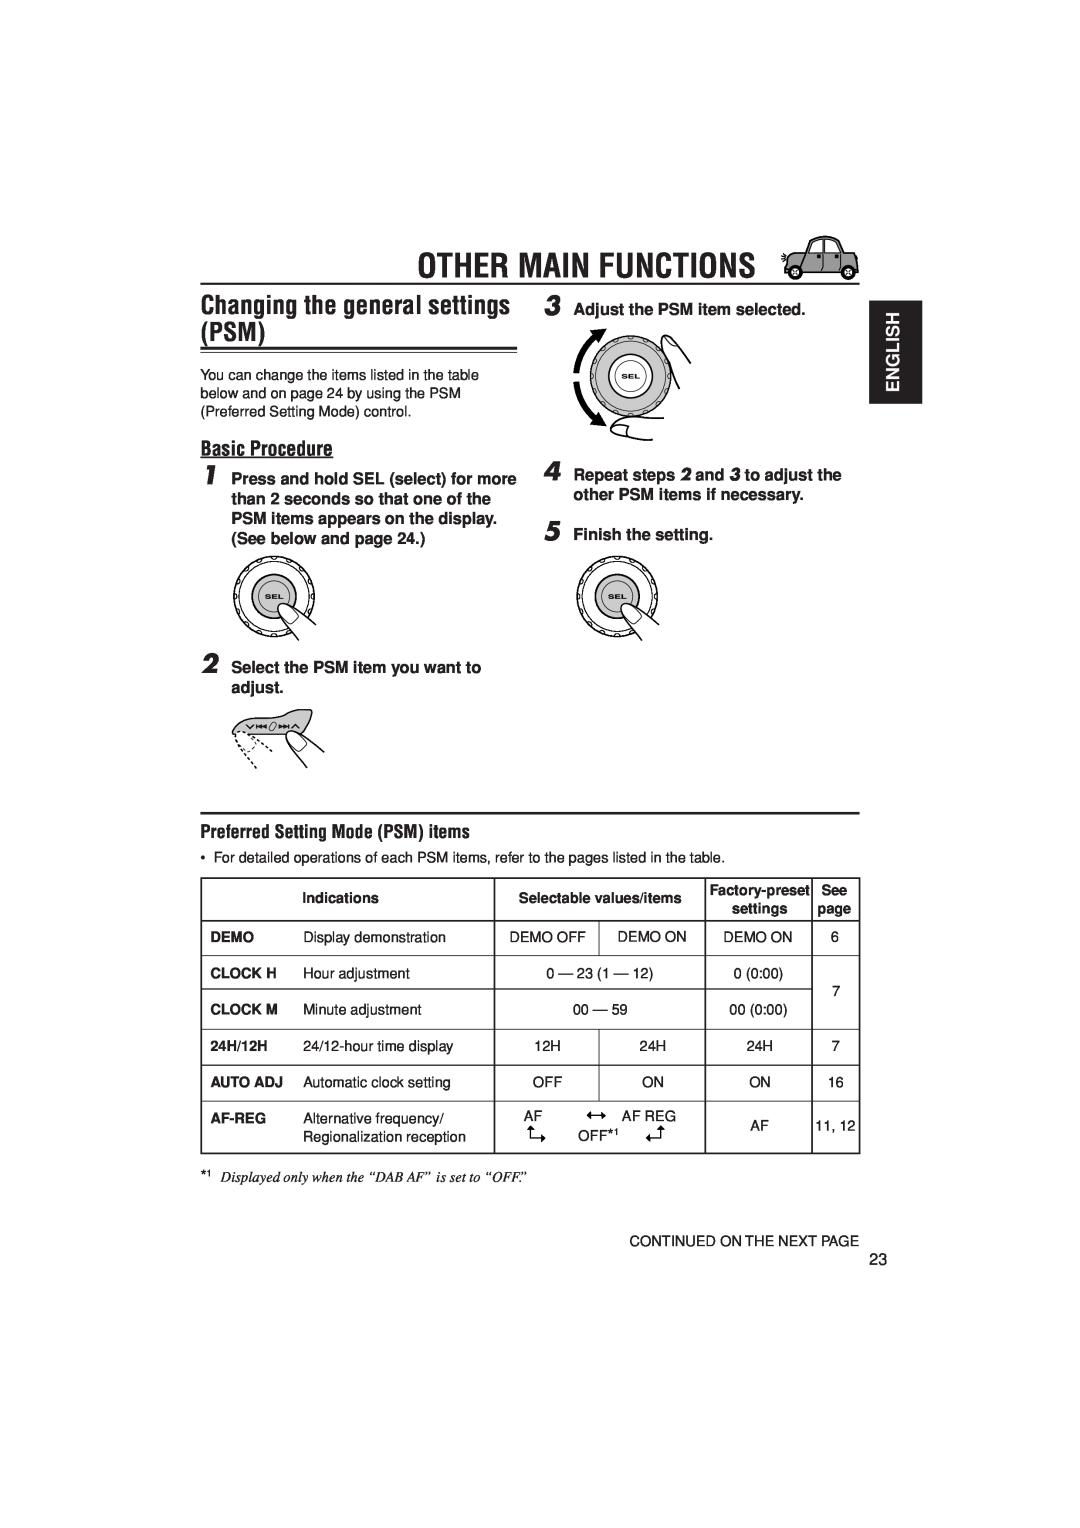 JVC KD-G302, KD-G301 manual Other Main Functions, Basic Procedure, Preferred Setting Mode PSM items, English 